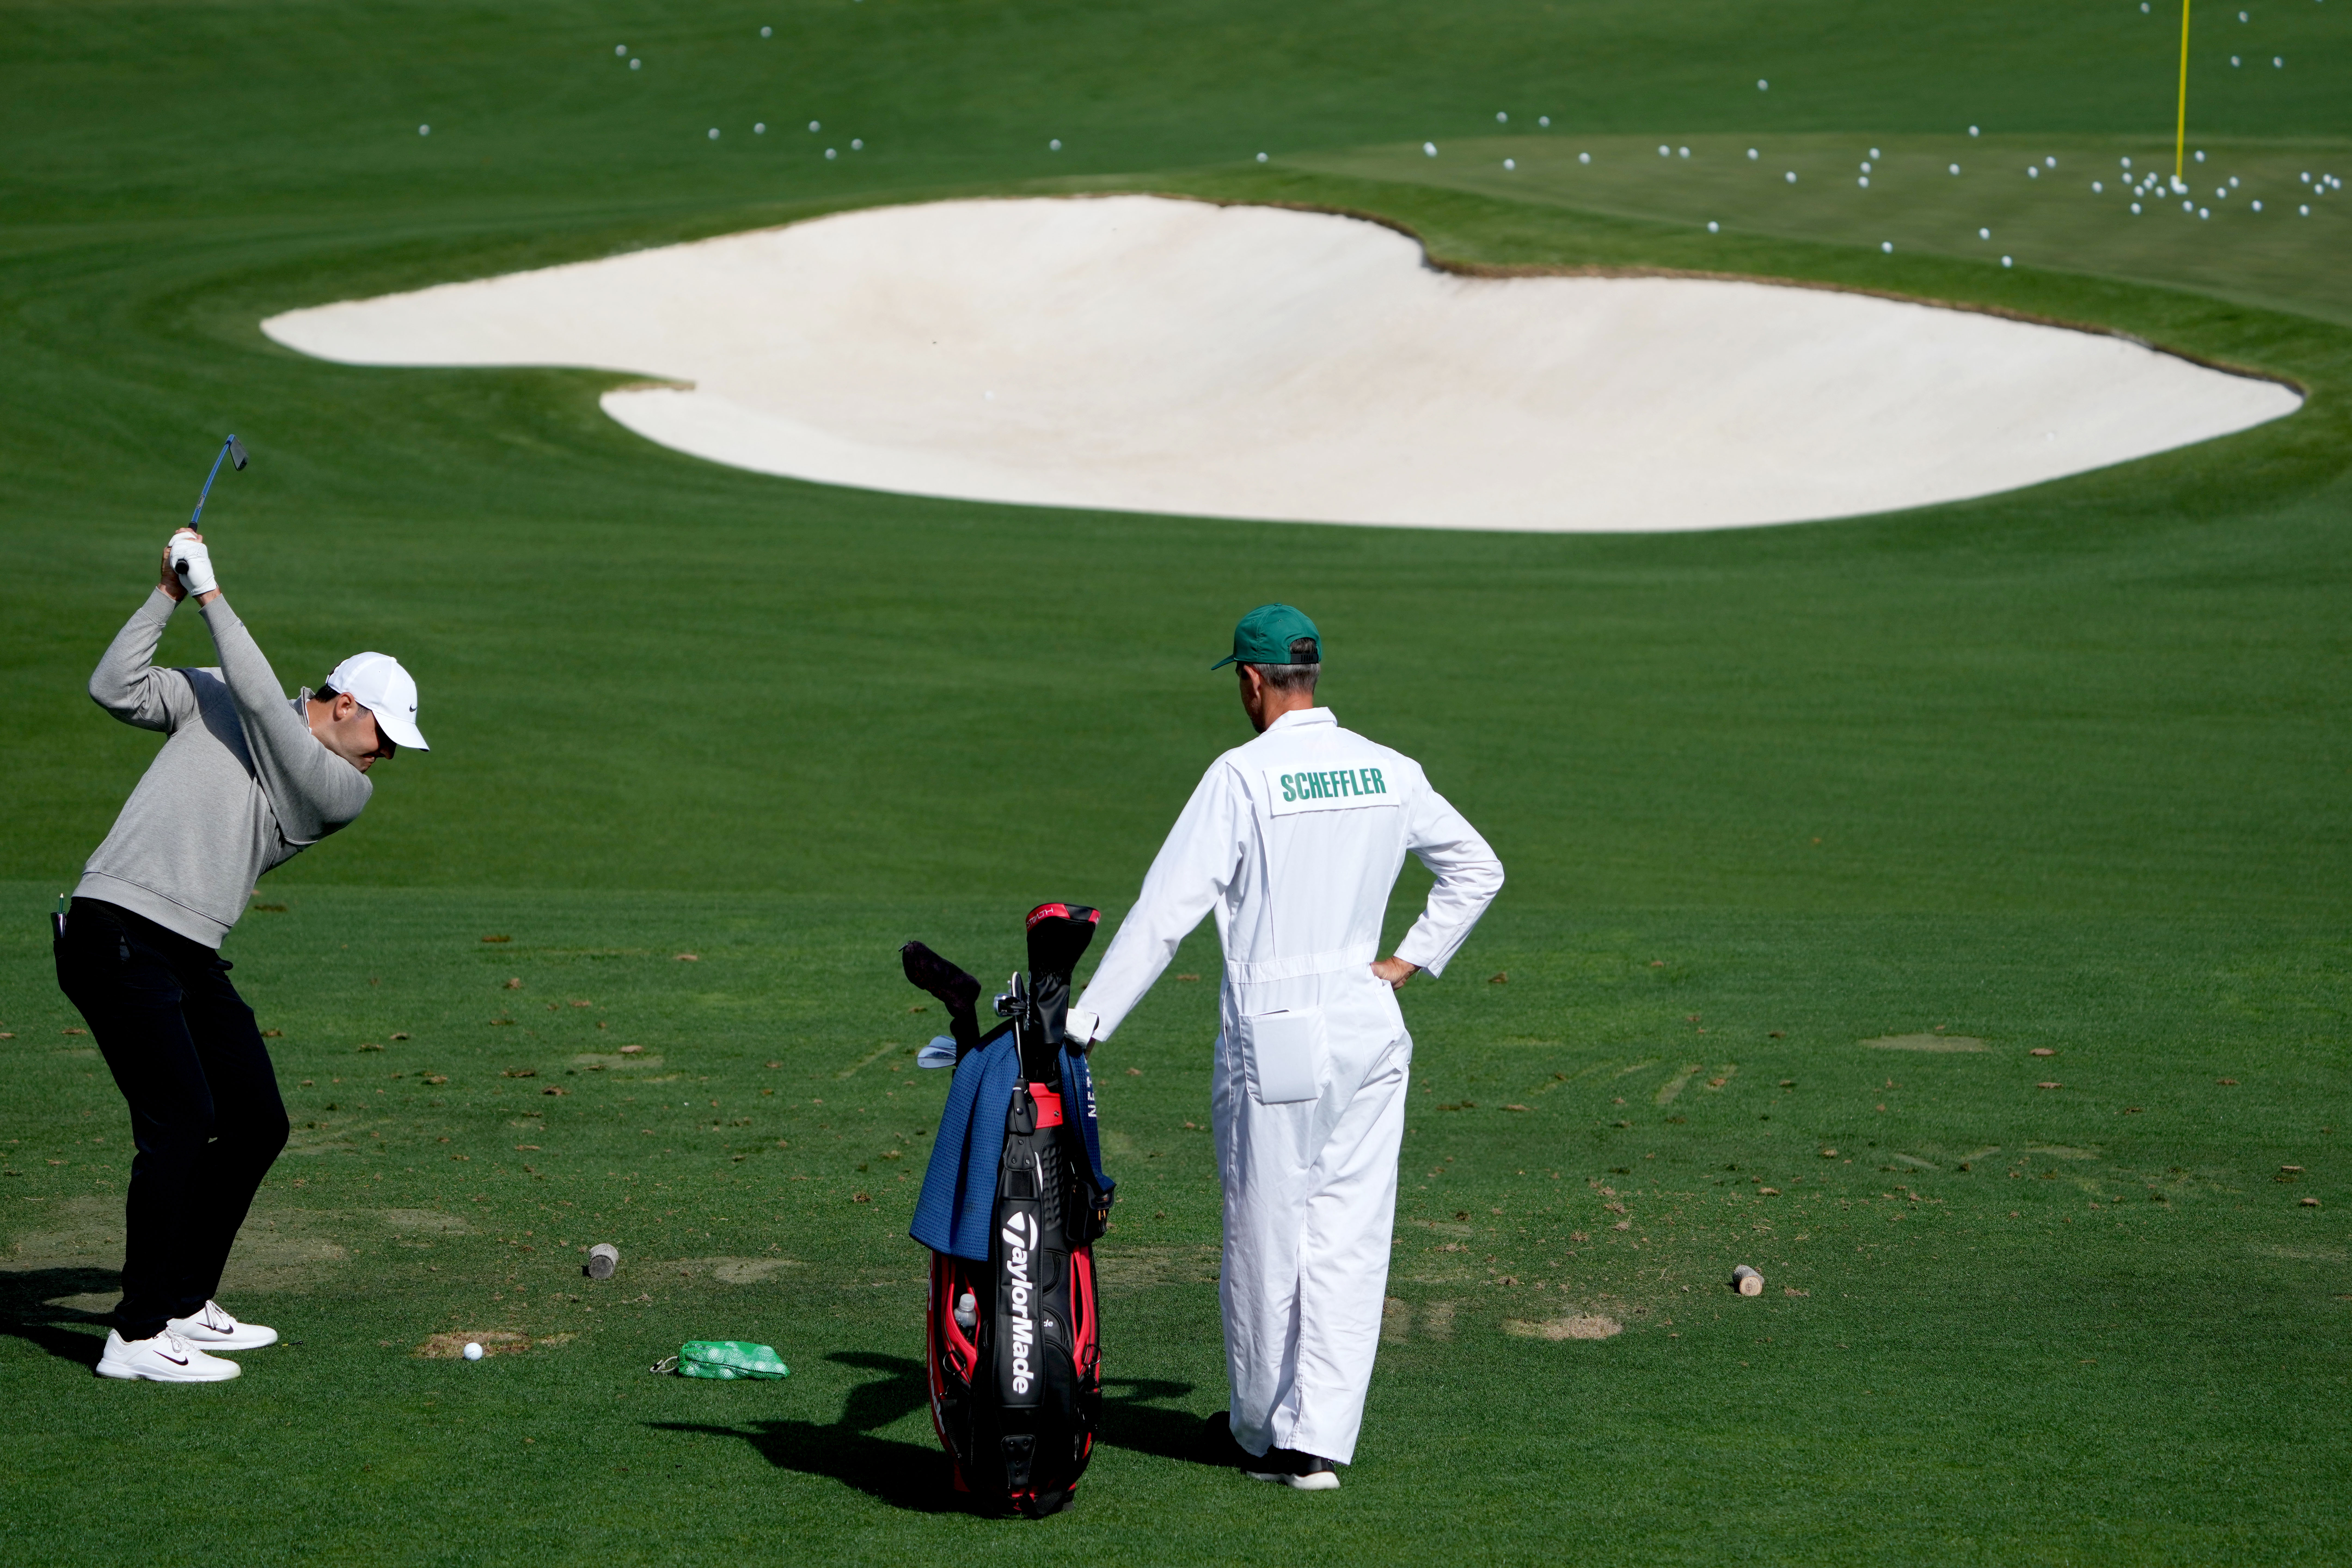 Masters field by the rankings: Top two are no surprise but look who’s third on this list